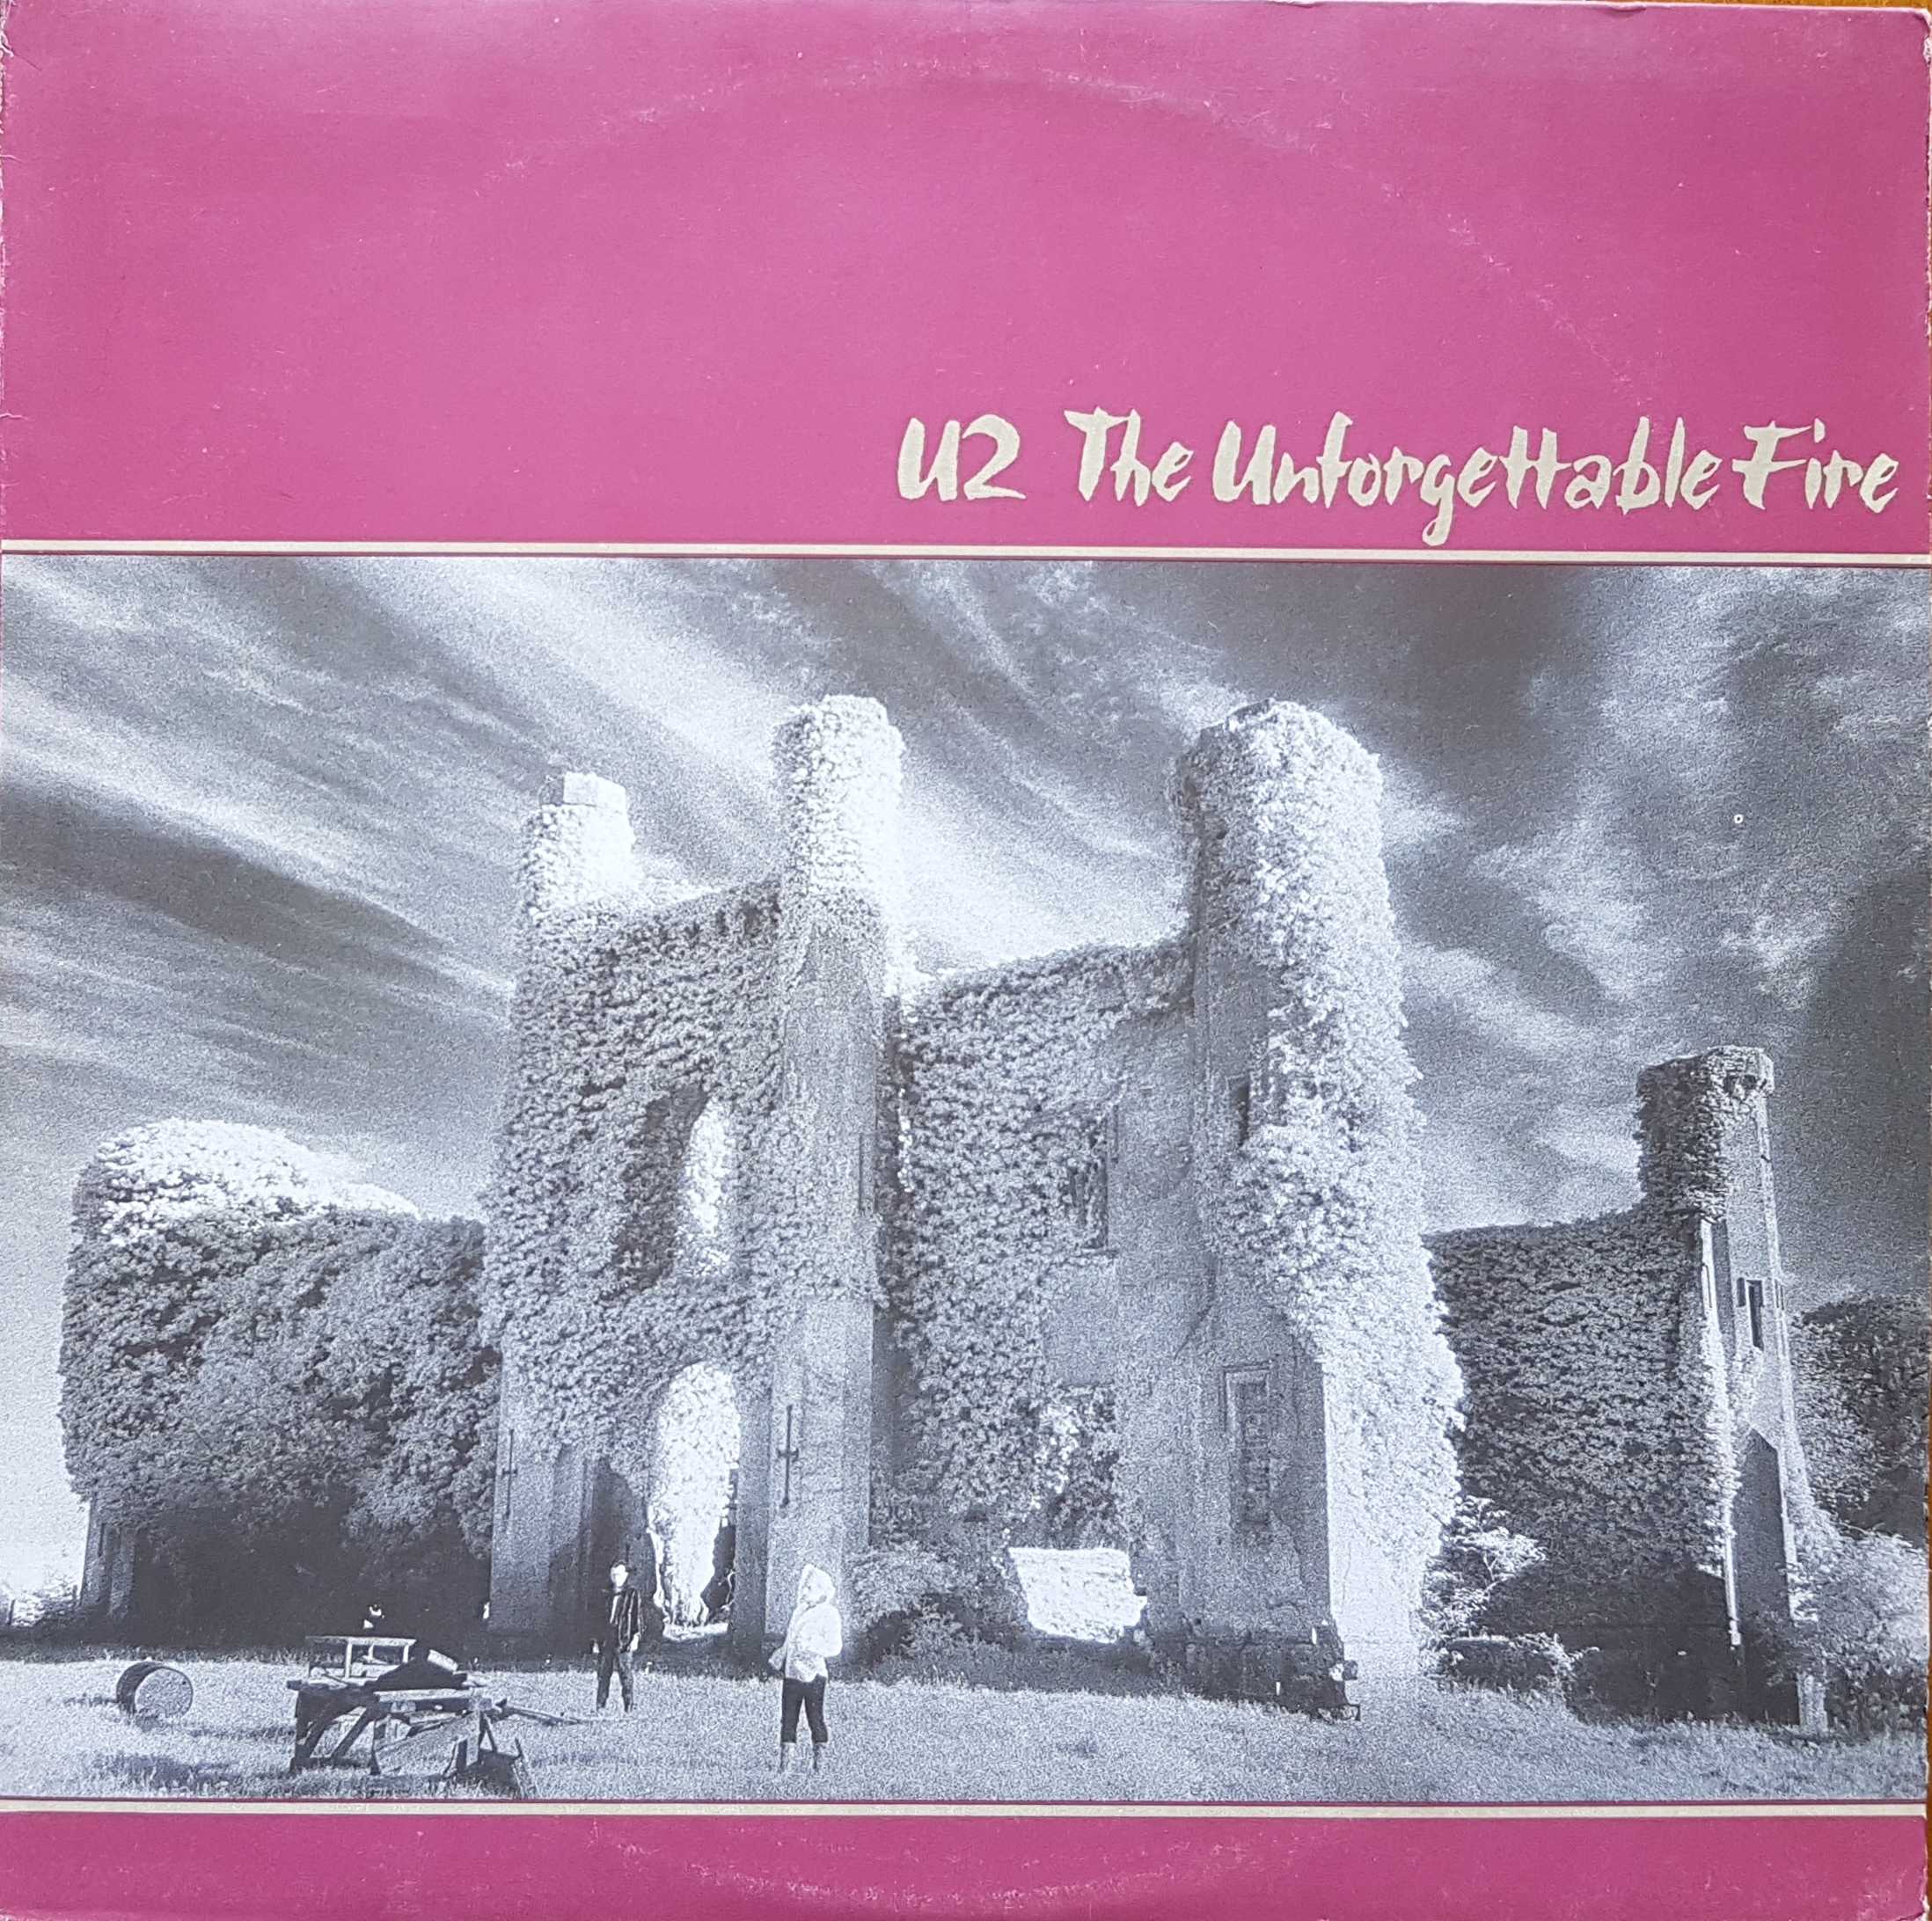 Picture of The unforgettable fire by artist U2 